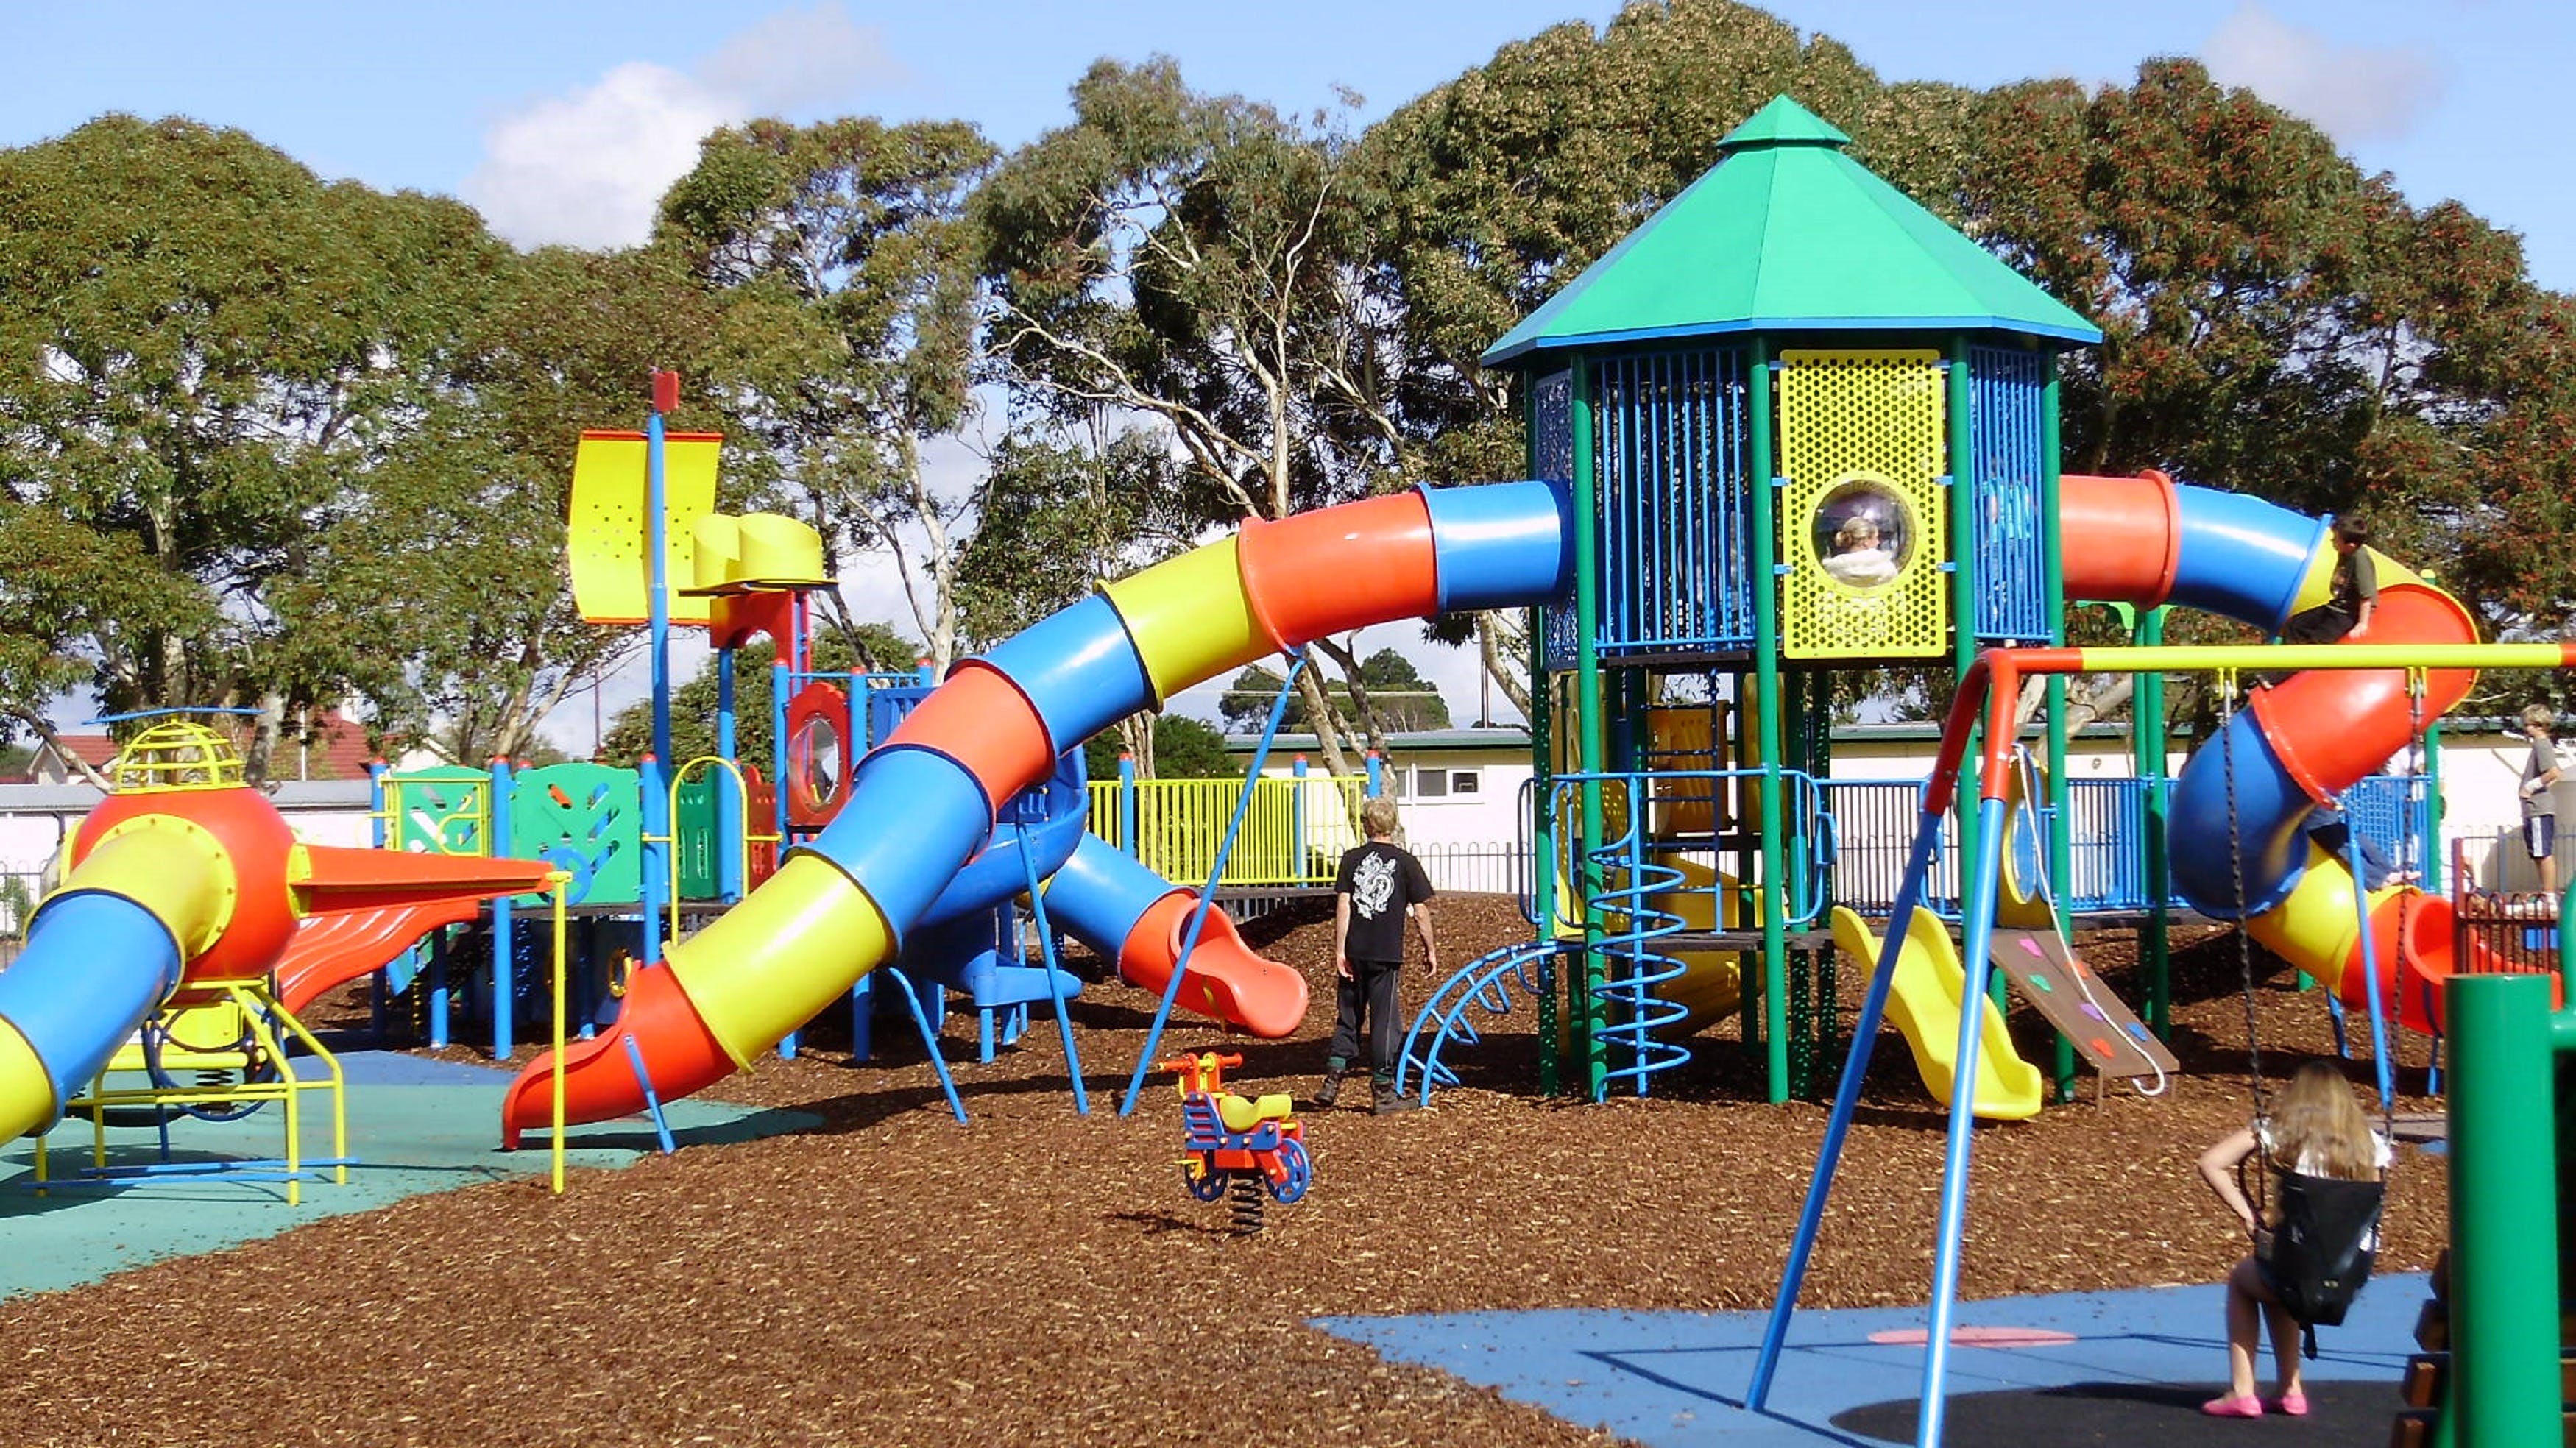 Millicent Mega Playground in The Domain - Accommodation Brunswick Heads